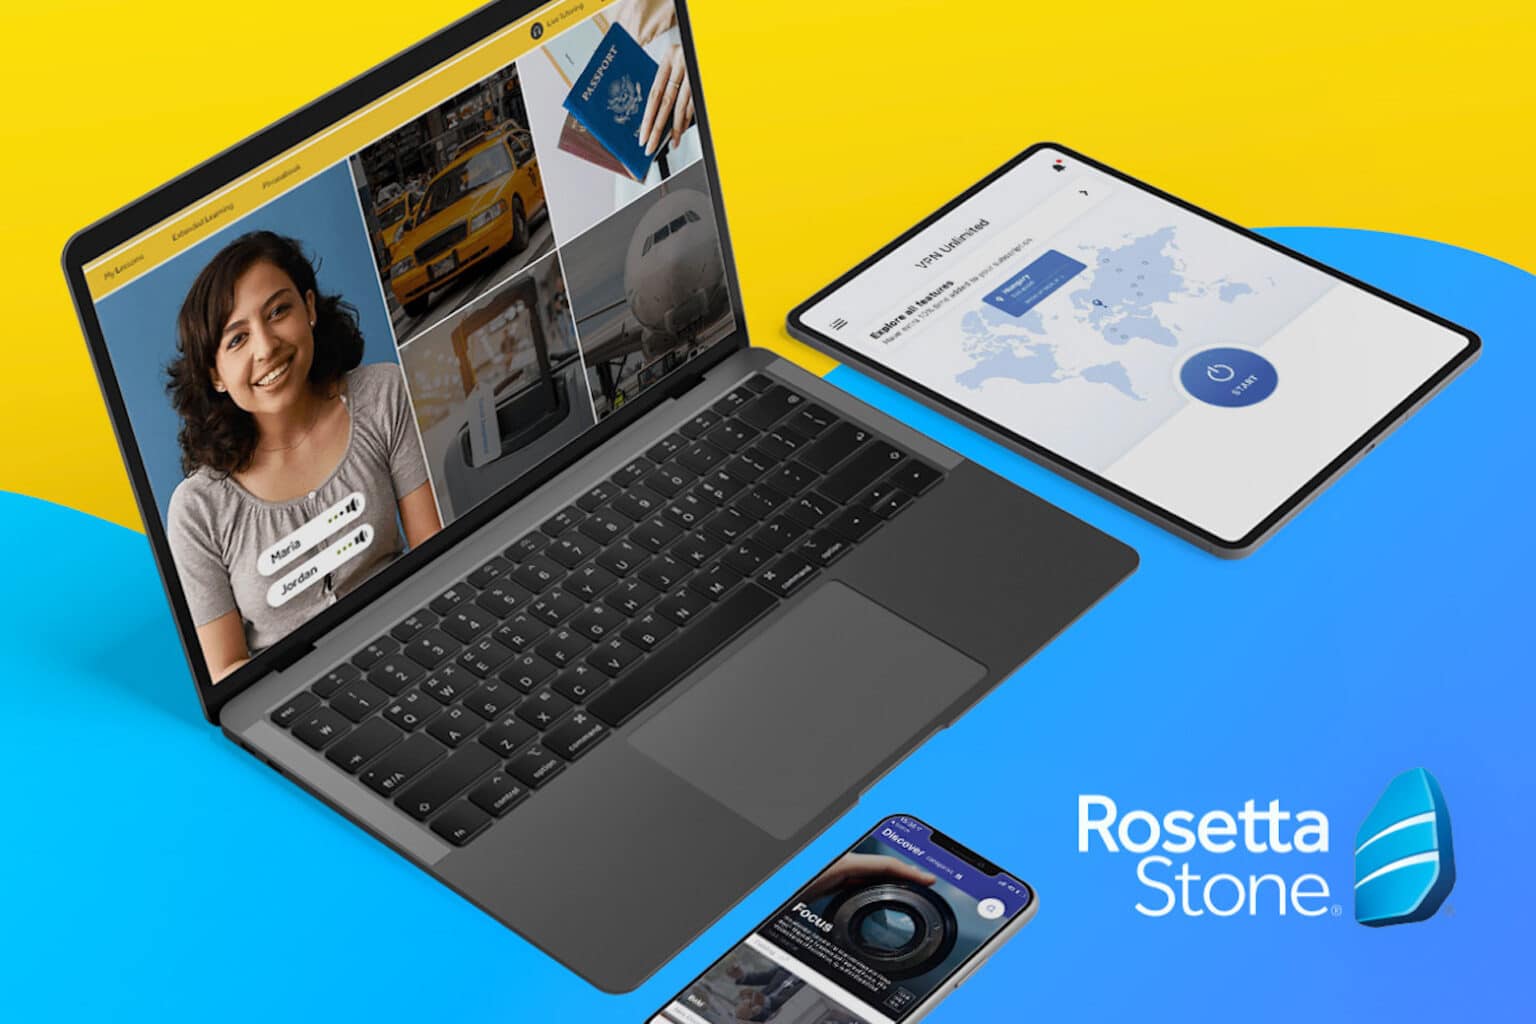 Pick up the popular Rosetta Stone language-learning app for only $145.